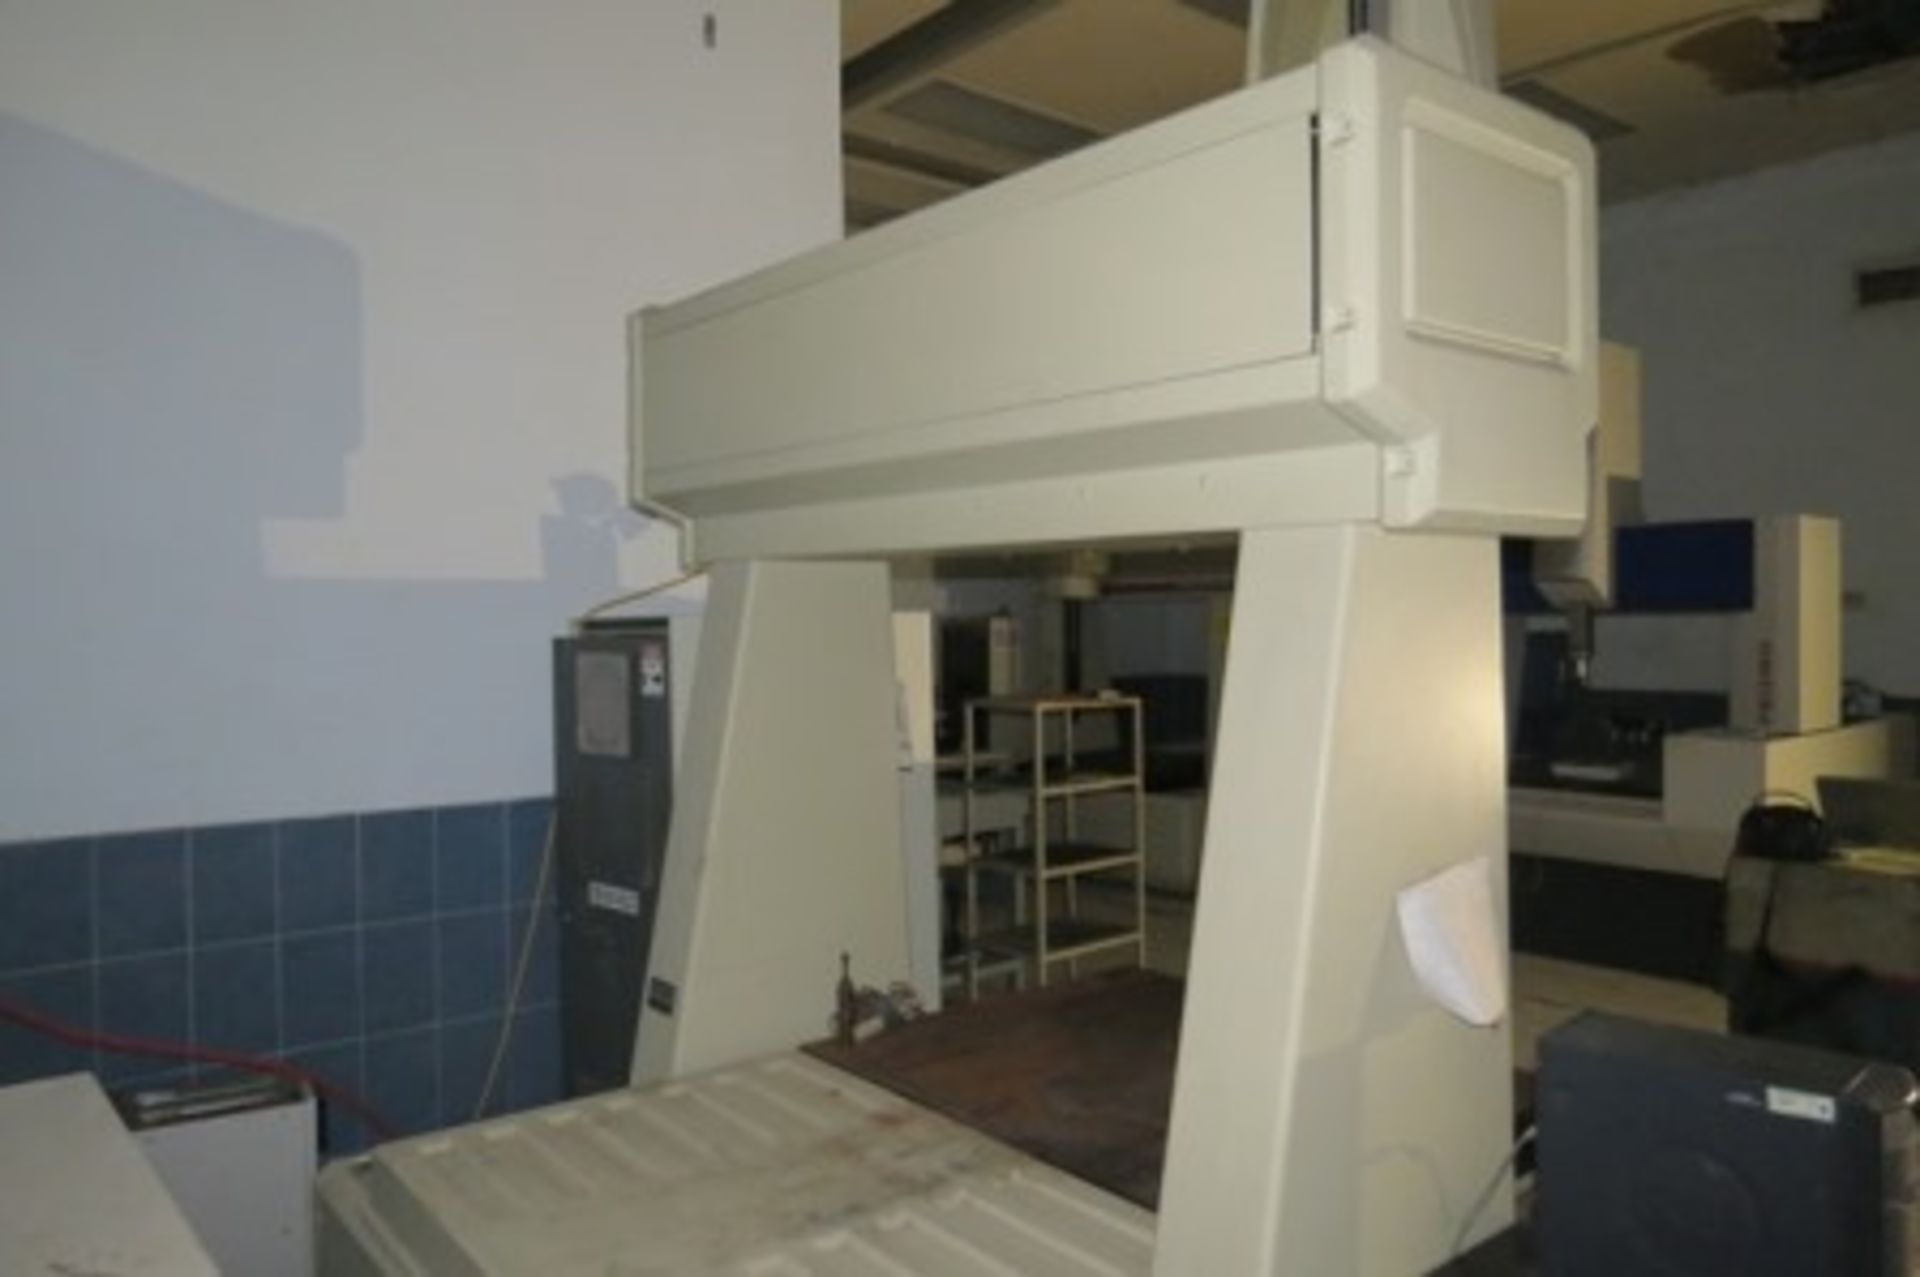 Giddings & Lewis Cordax RS-70 s/n A-0831-1094, coordinate measuring machine - Image 12 of 23